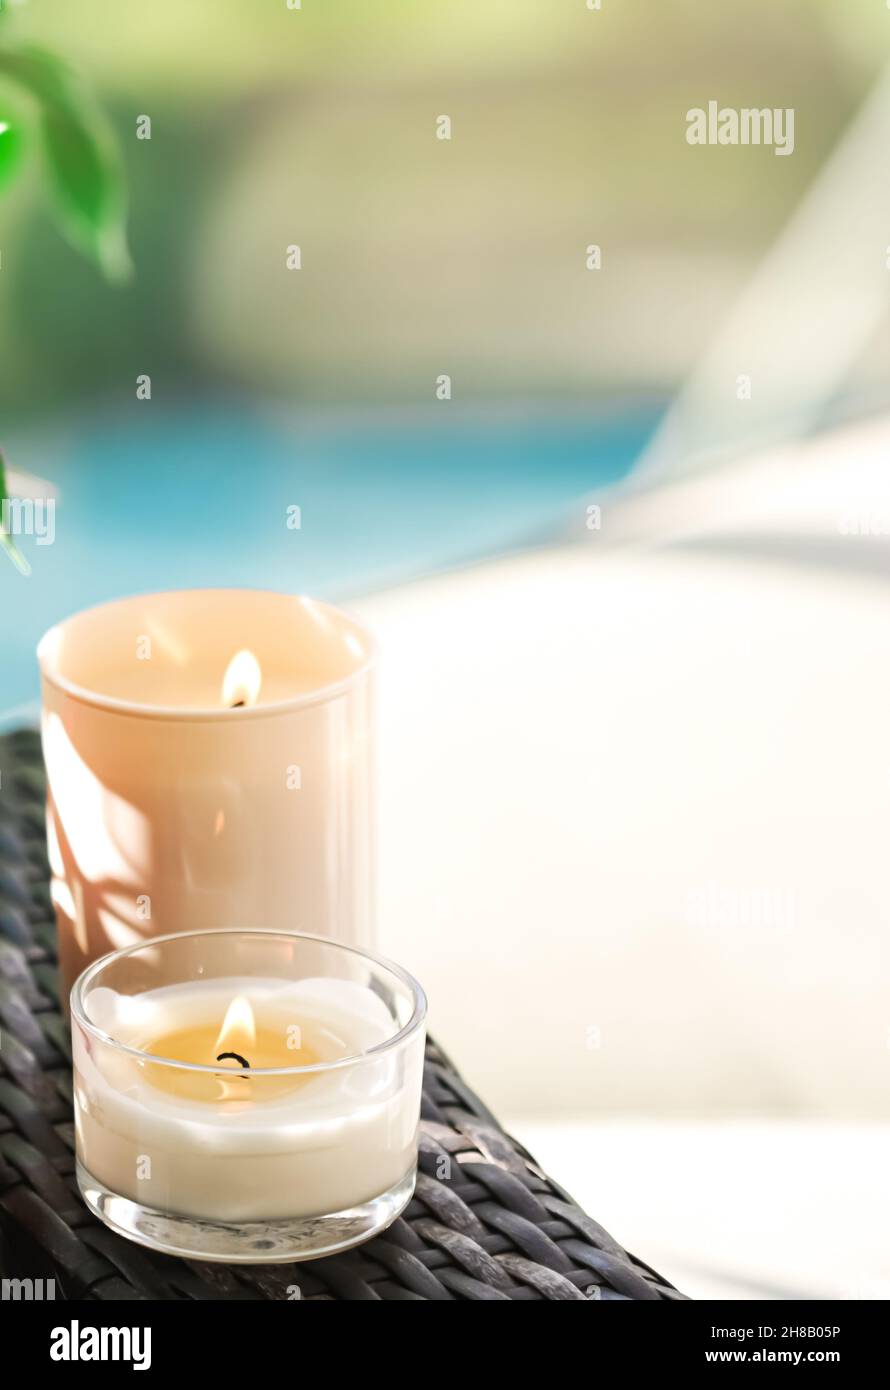 https://c8.alamy.com/comp/2H8B05P/scented-candles-collection-as-luxury-spa-background-and-bathroom-home-decor-organic-aroma-candle-for-aromatherapy-and-relaxed-atmosphere-beauty-and-2H8B05P.jpg